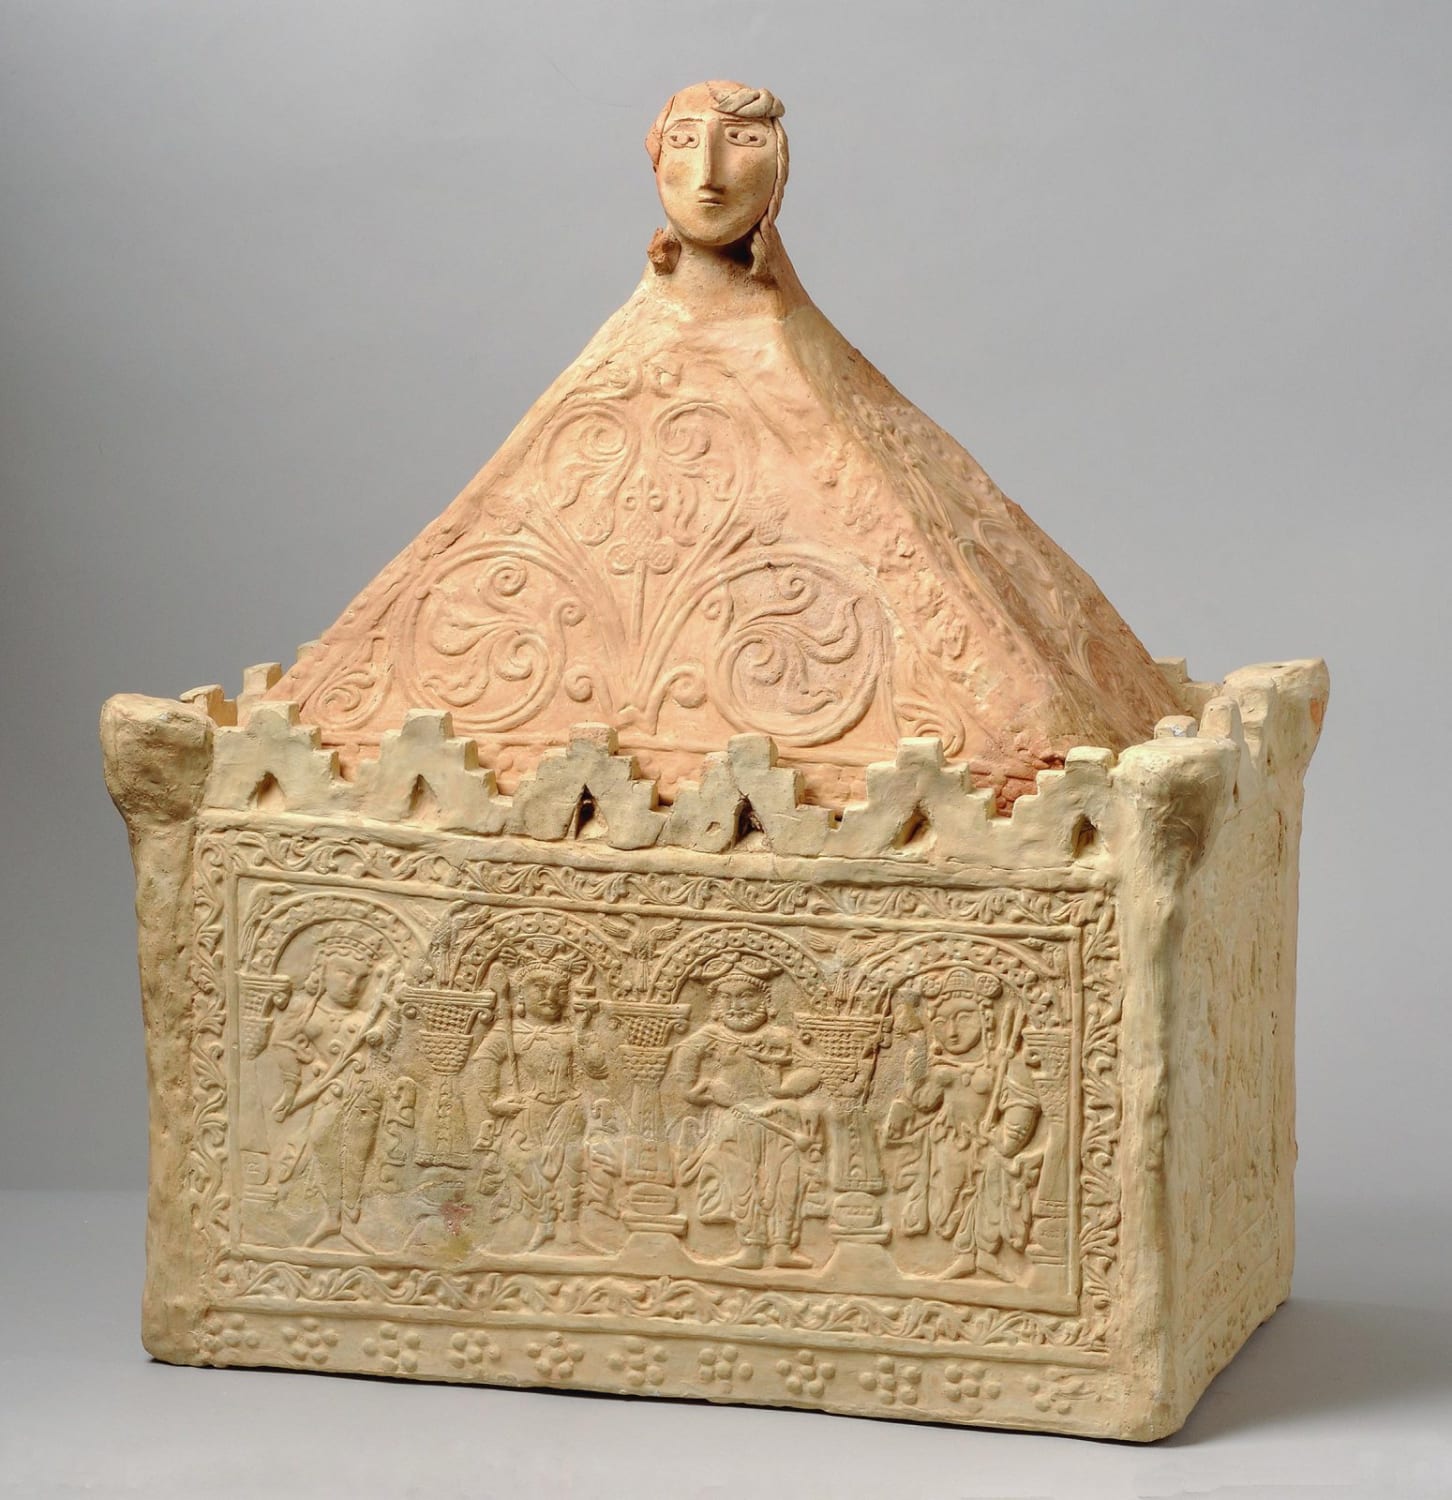 The Sogdian Durman Tepe Ossuary (bone box) was produced by this Silk Road merchant society in the 7th-8th century CE. The crowned figures are likely Zoroastrian "beneficent immortals," virtues created by Ahura Mazda to fight evil. Found in Uzbekistan. Museum of Oriental Art, Moscow.